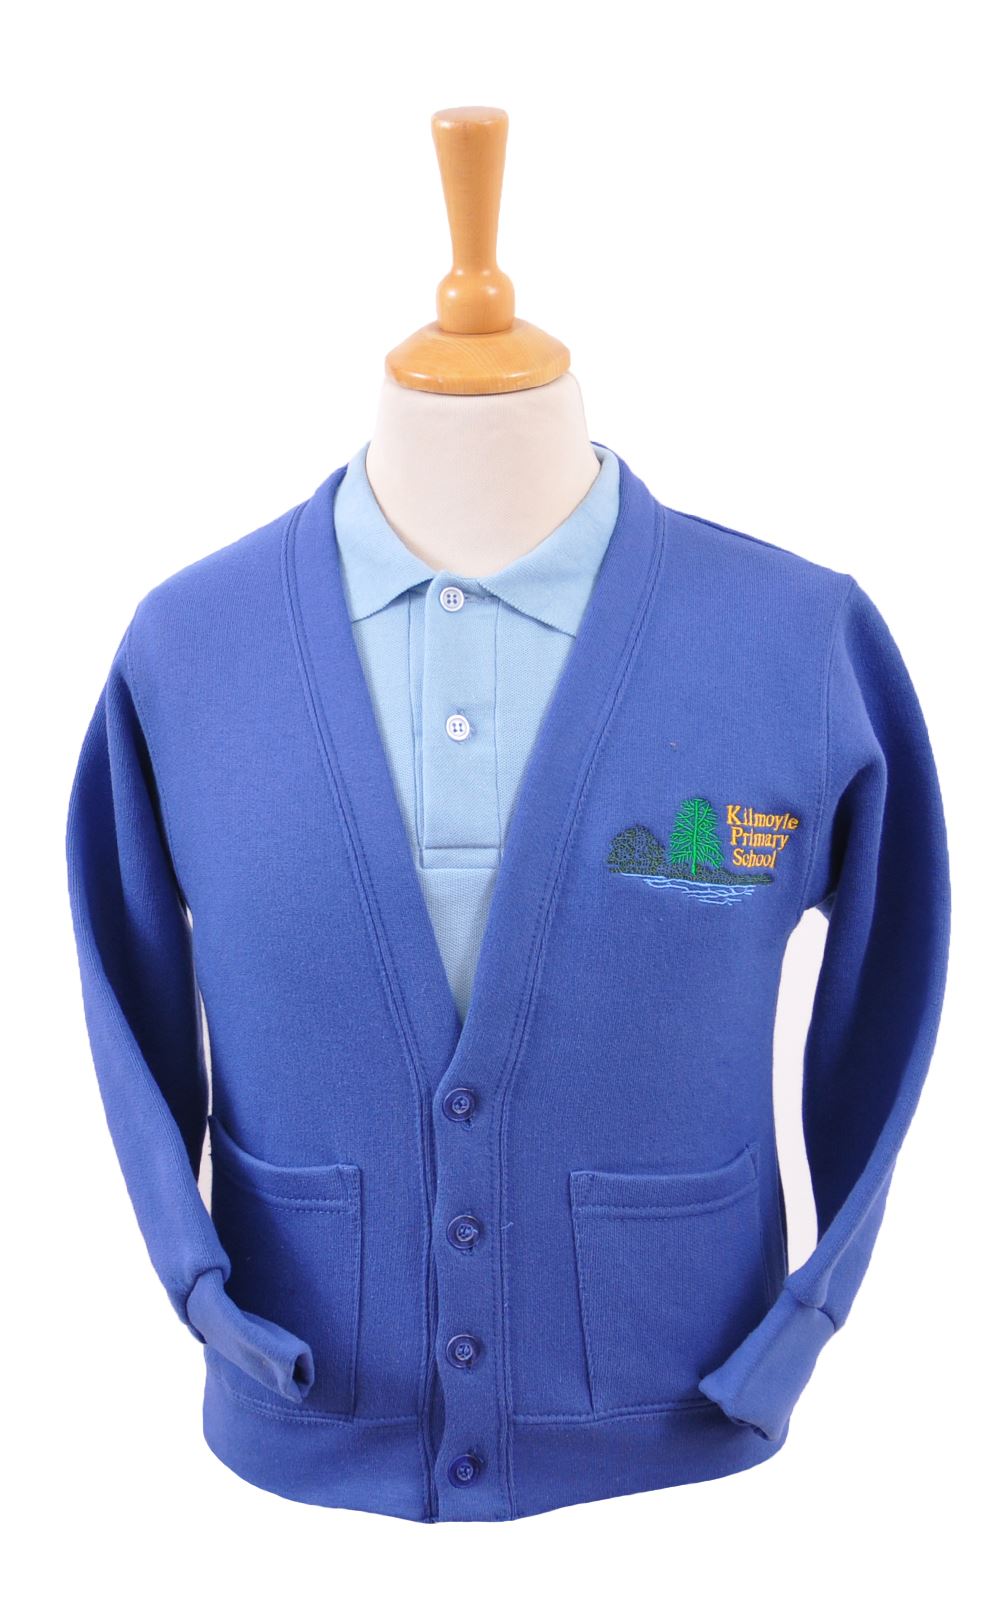 Picture of Kilmoyle PS Sweat Cardigan - Blue Max